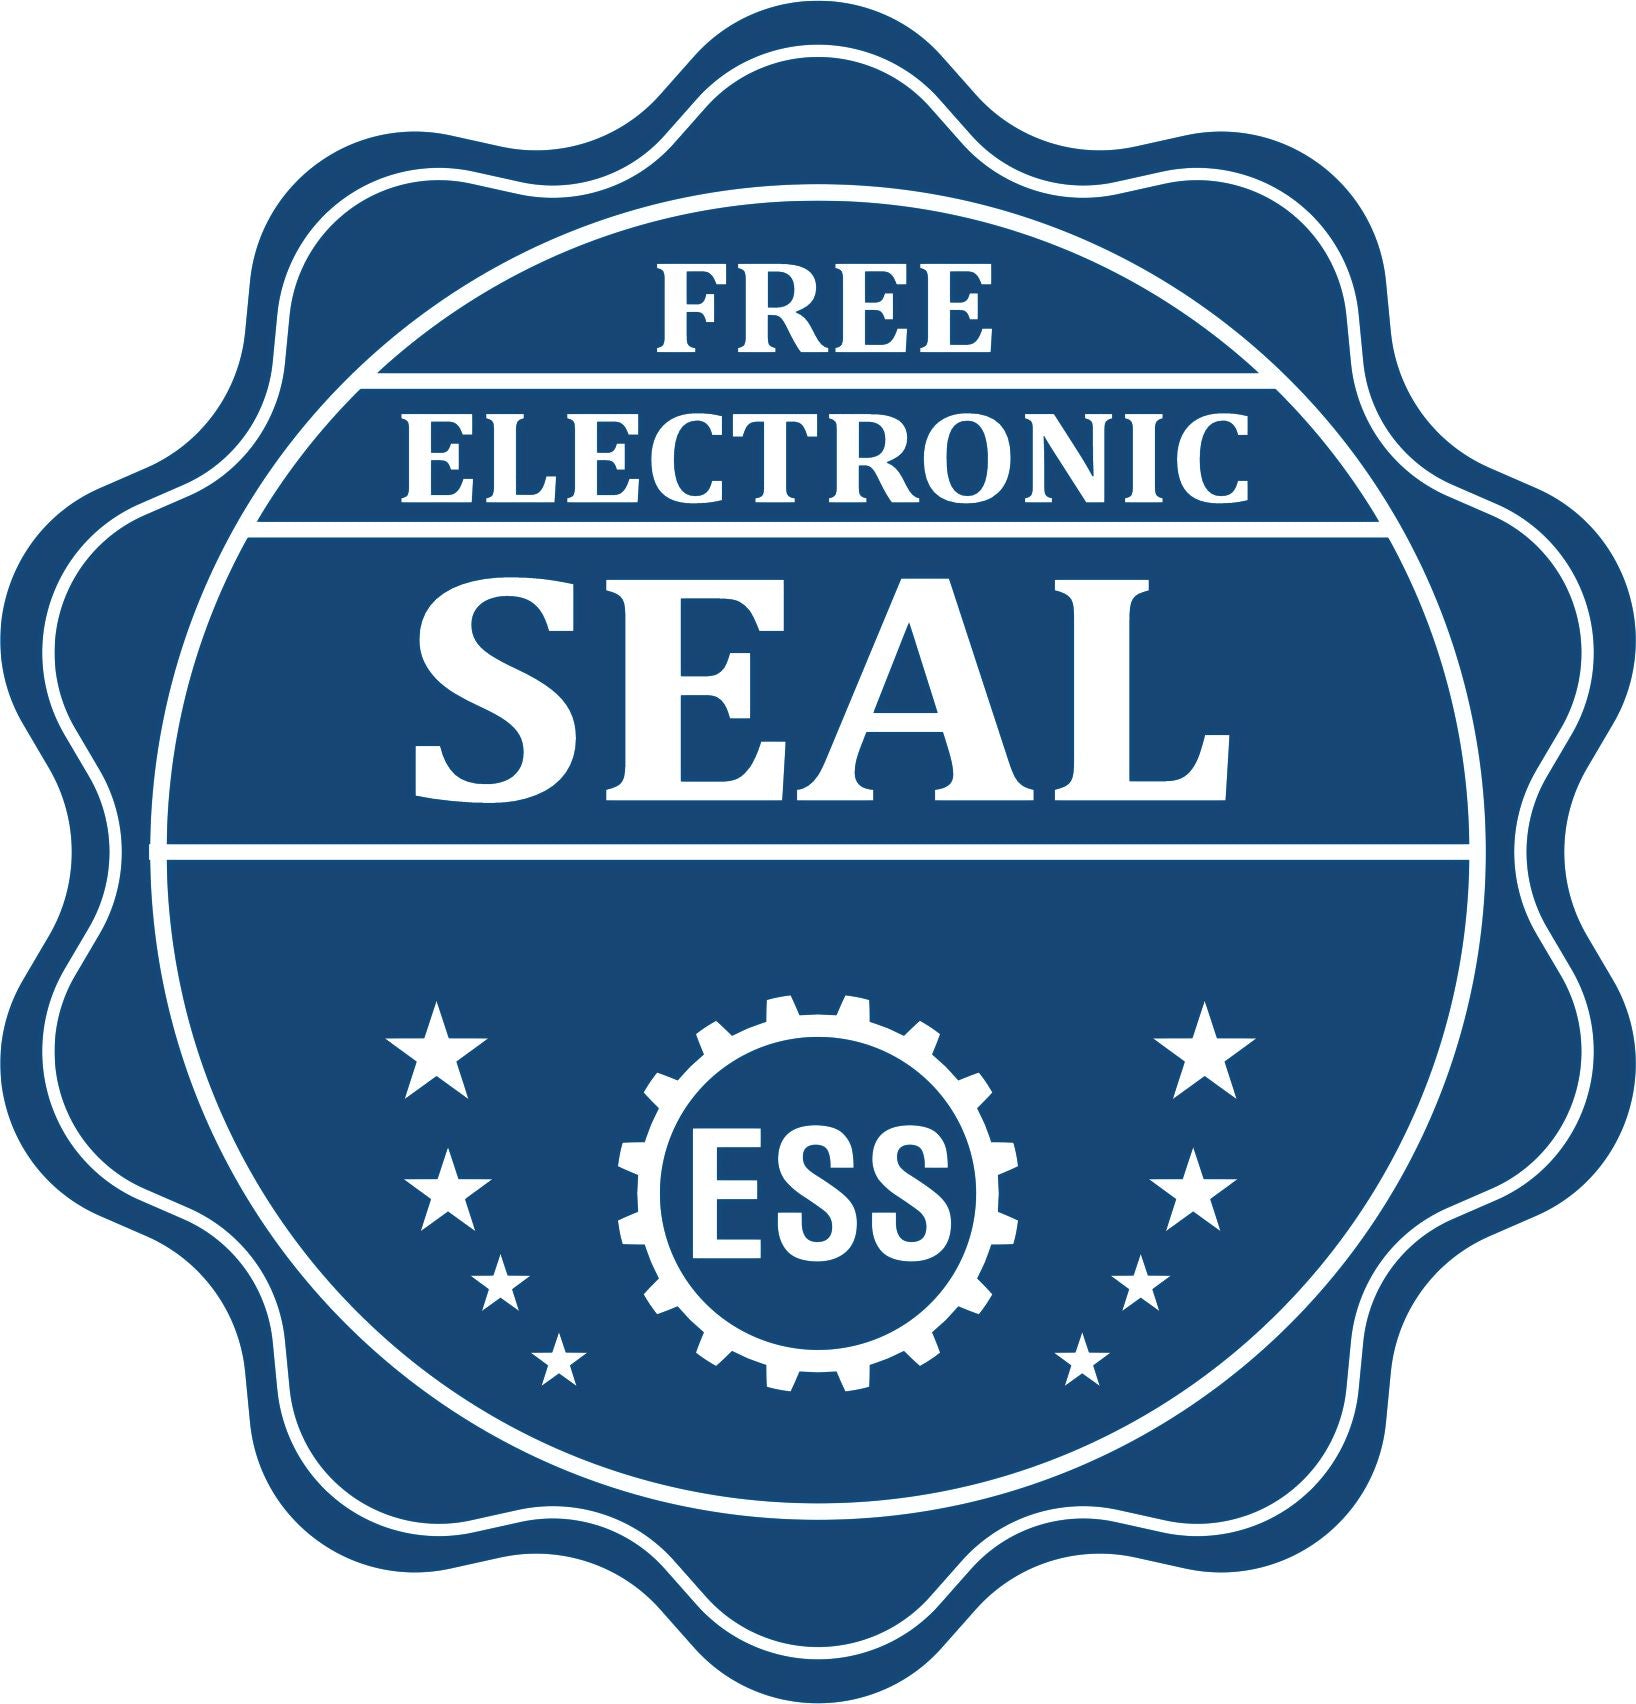 A badge showing a free electronic seal for the Heavy Duty Cast Iron Michigan Land Surveyor Seal Embosser with stars and the ESS gear on the emblem.